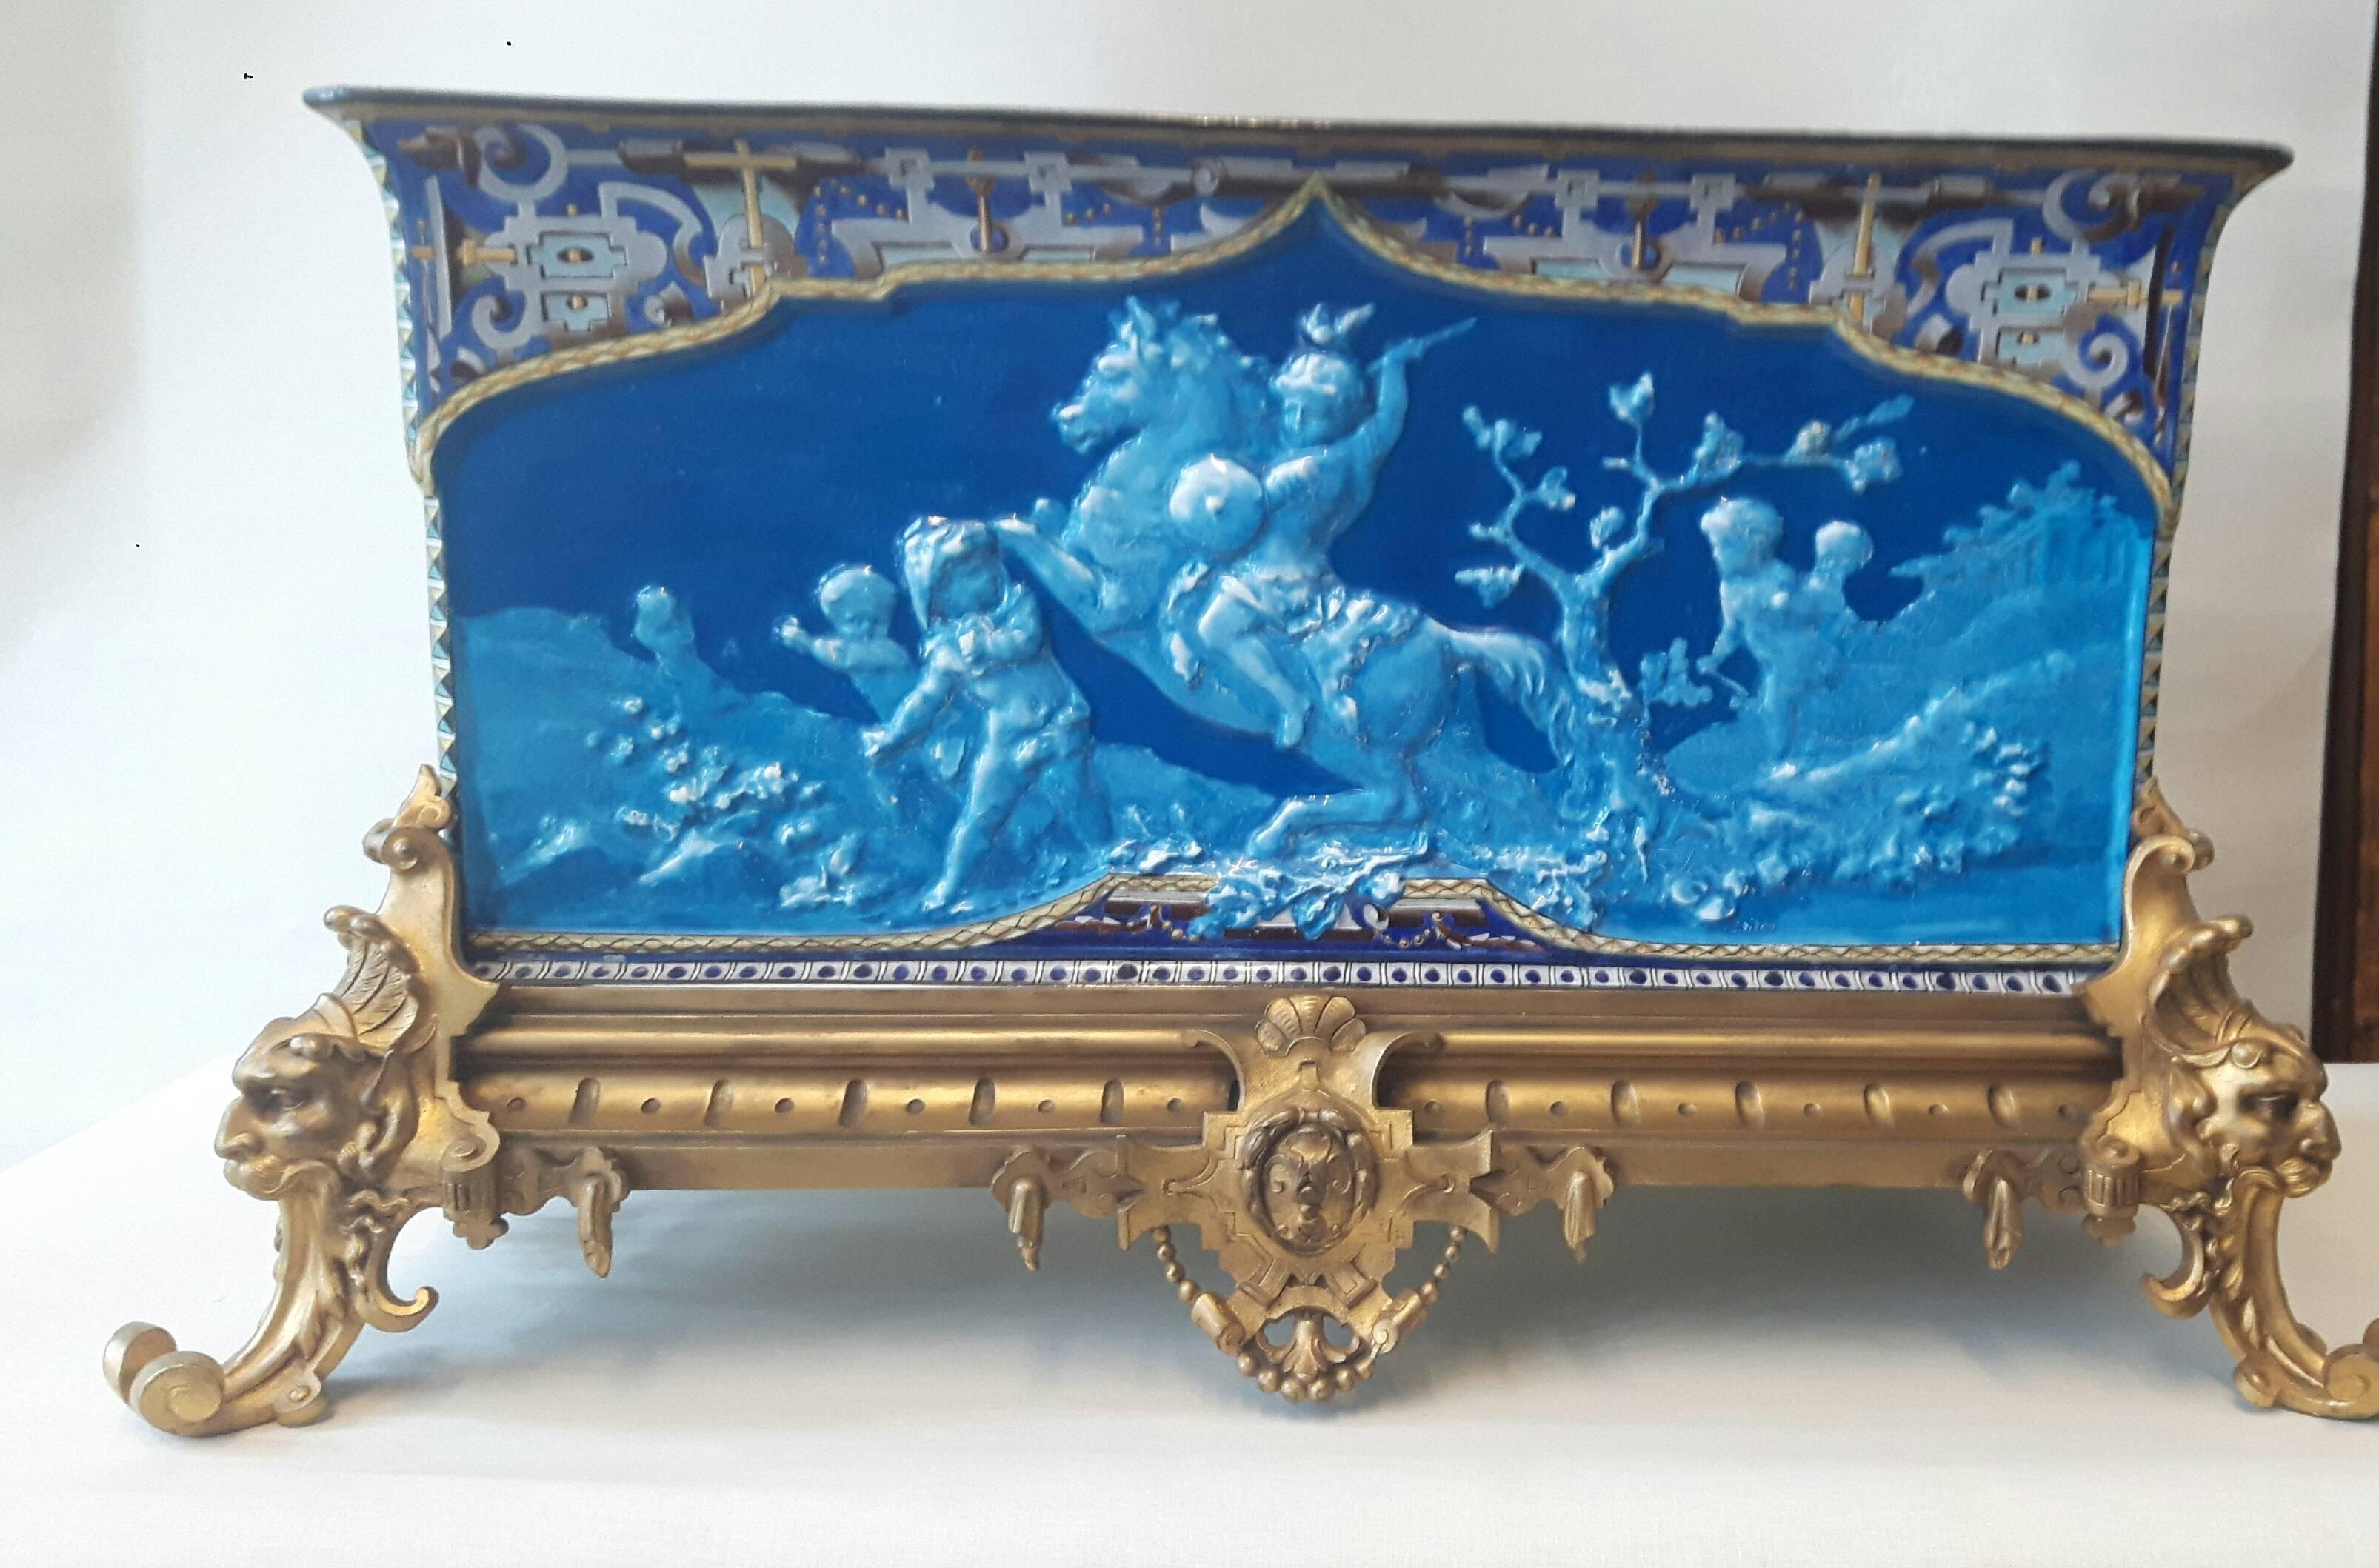 Neoclassical Unique French Barbotine 19th Century Ormolu Mounted Rectangular Jardinière For Sale